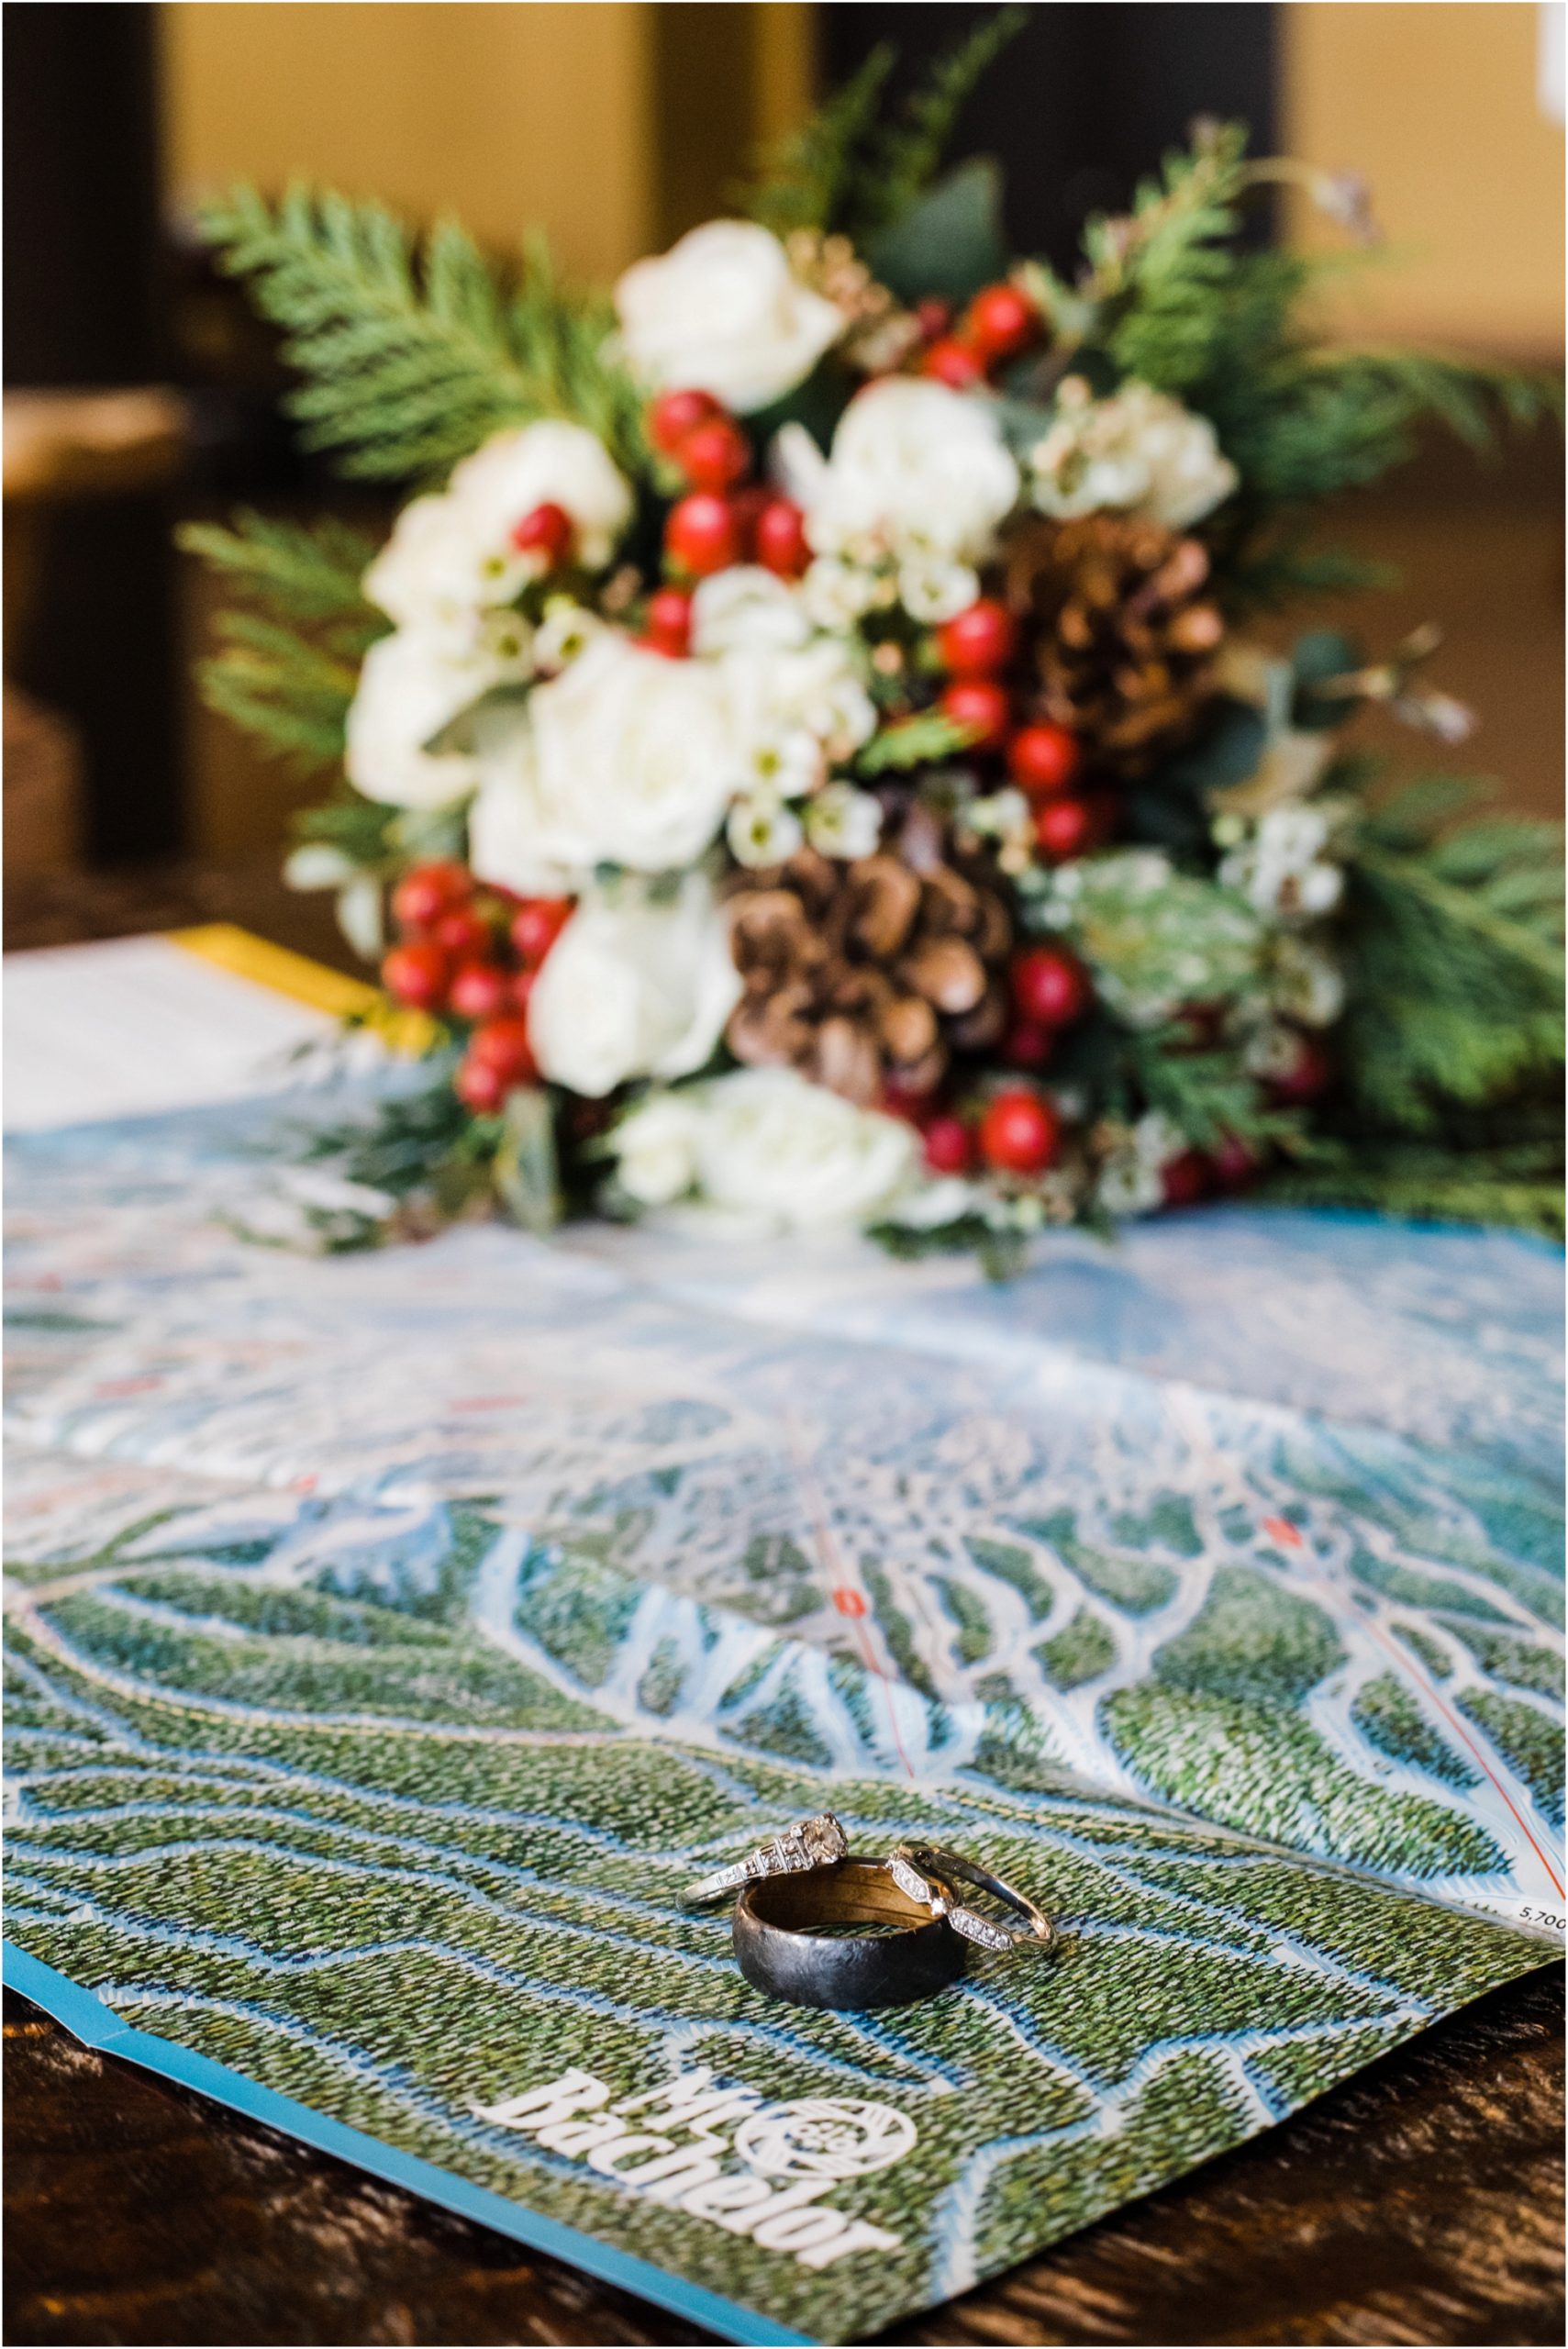 Wedding rings sit atop the Mt Bachelor trail map with a bouquet of white flowers, red berries, pine cones and green pine boughs for this winter skiing Mt Bachelor Adventure Elopement in Bend, OR. | Erica Swantek Photography